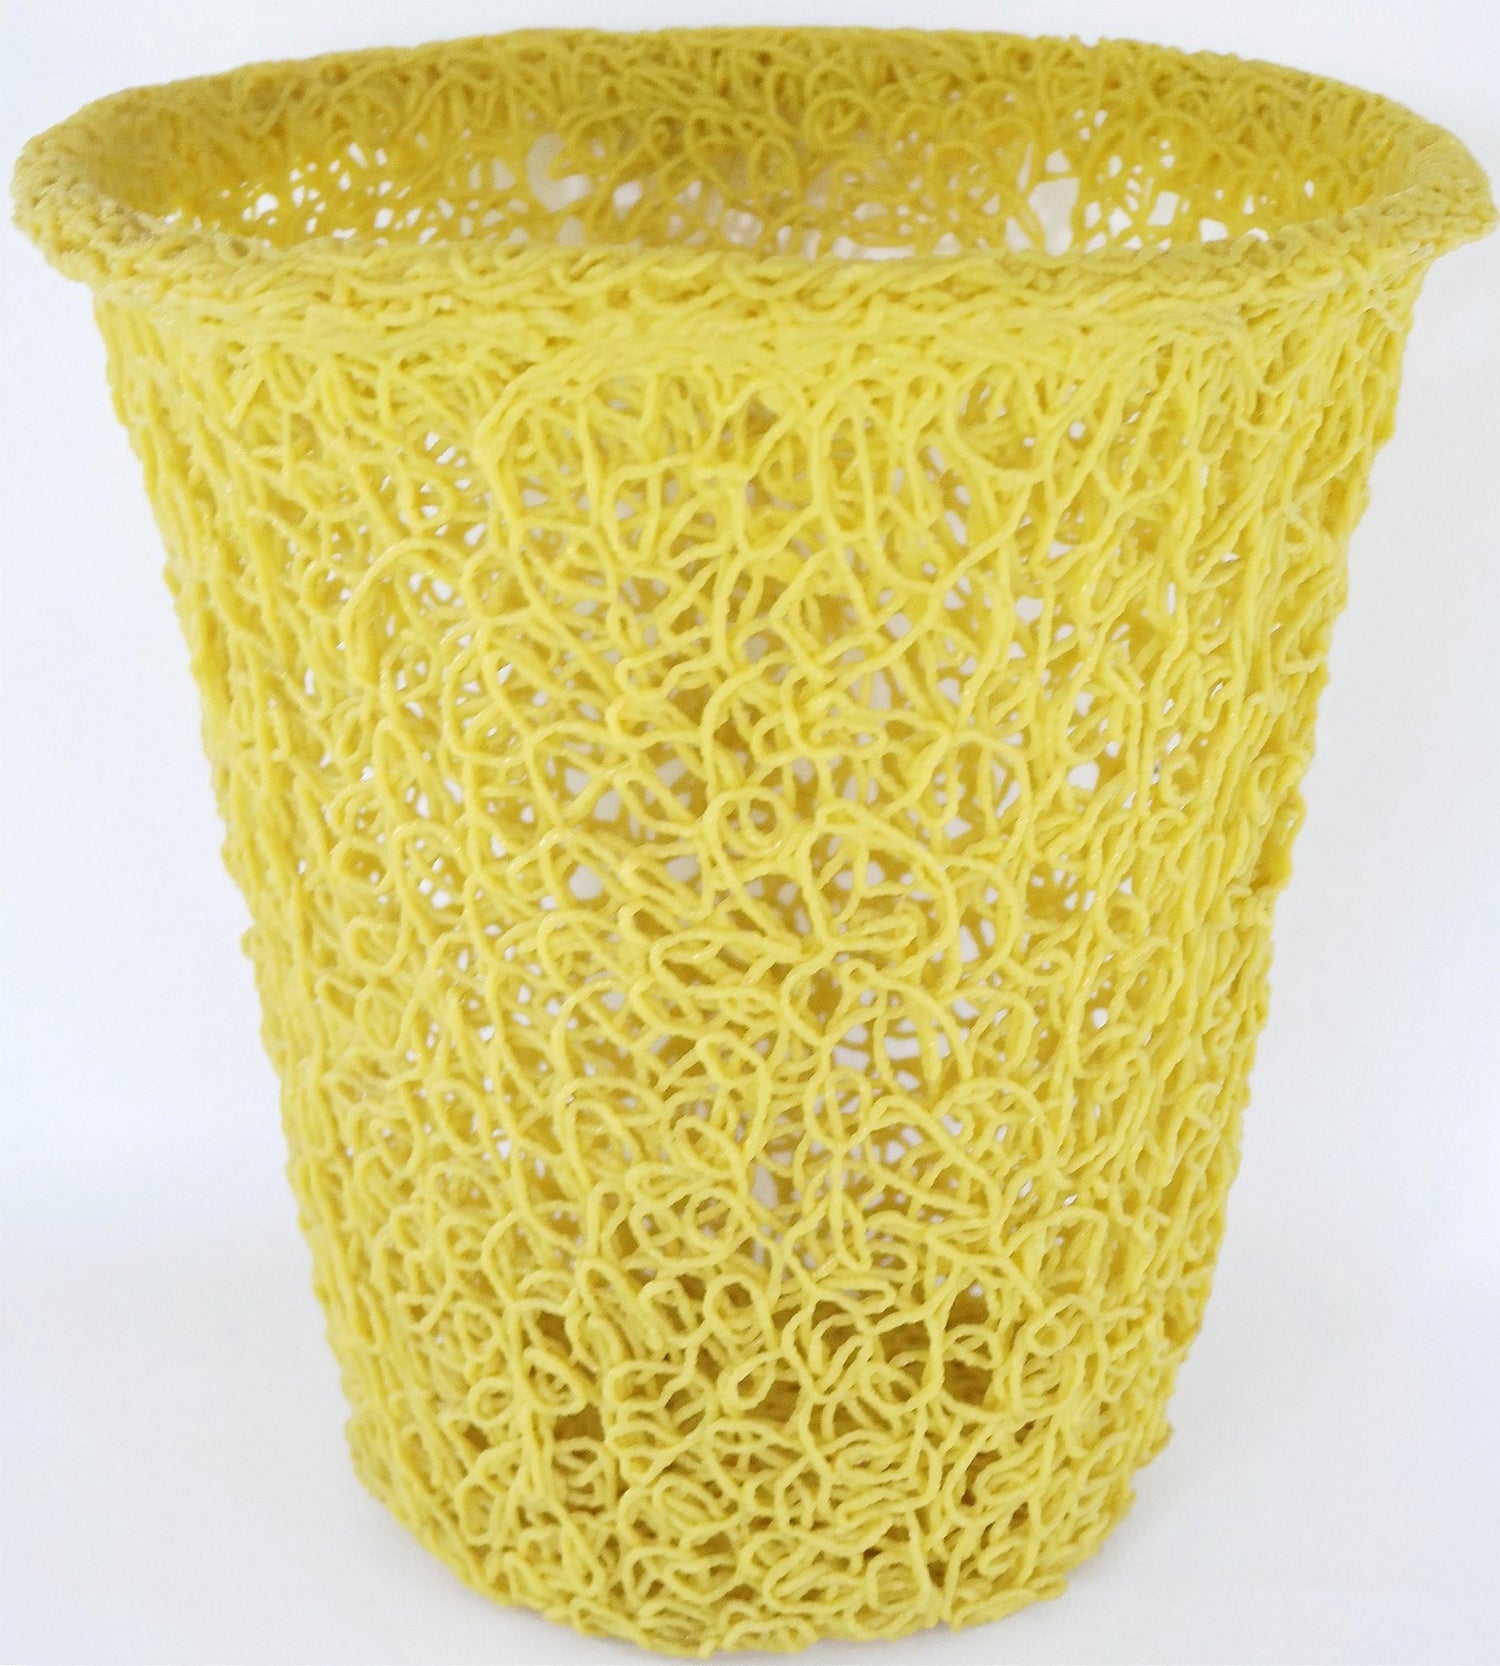 Vintage Auction | Mod 60's Spaghetti Waste Basket Can The Vintedge Co.